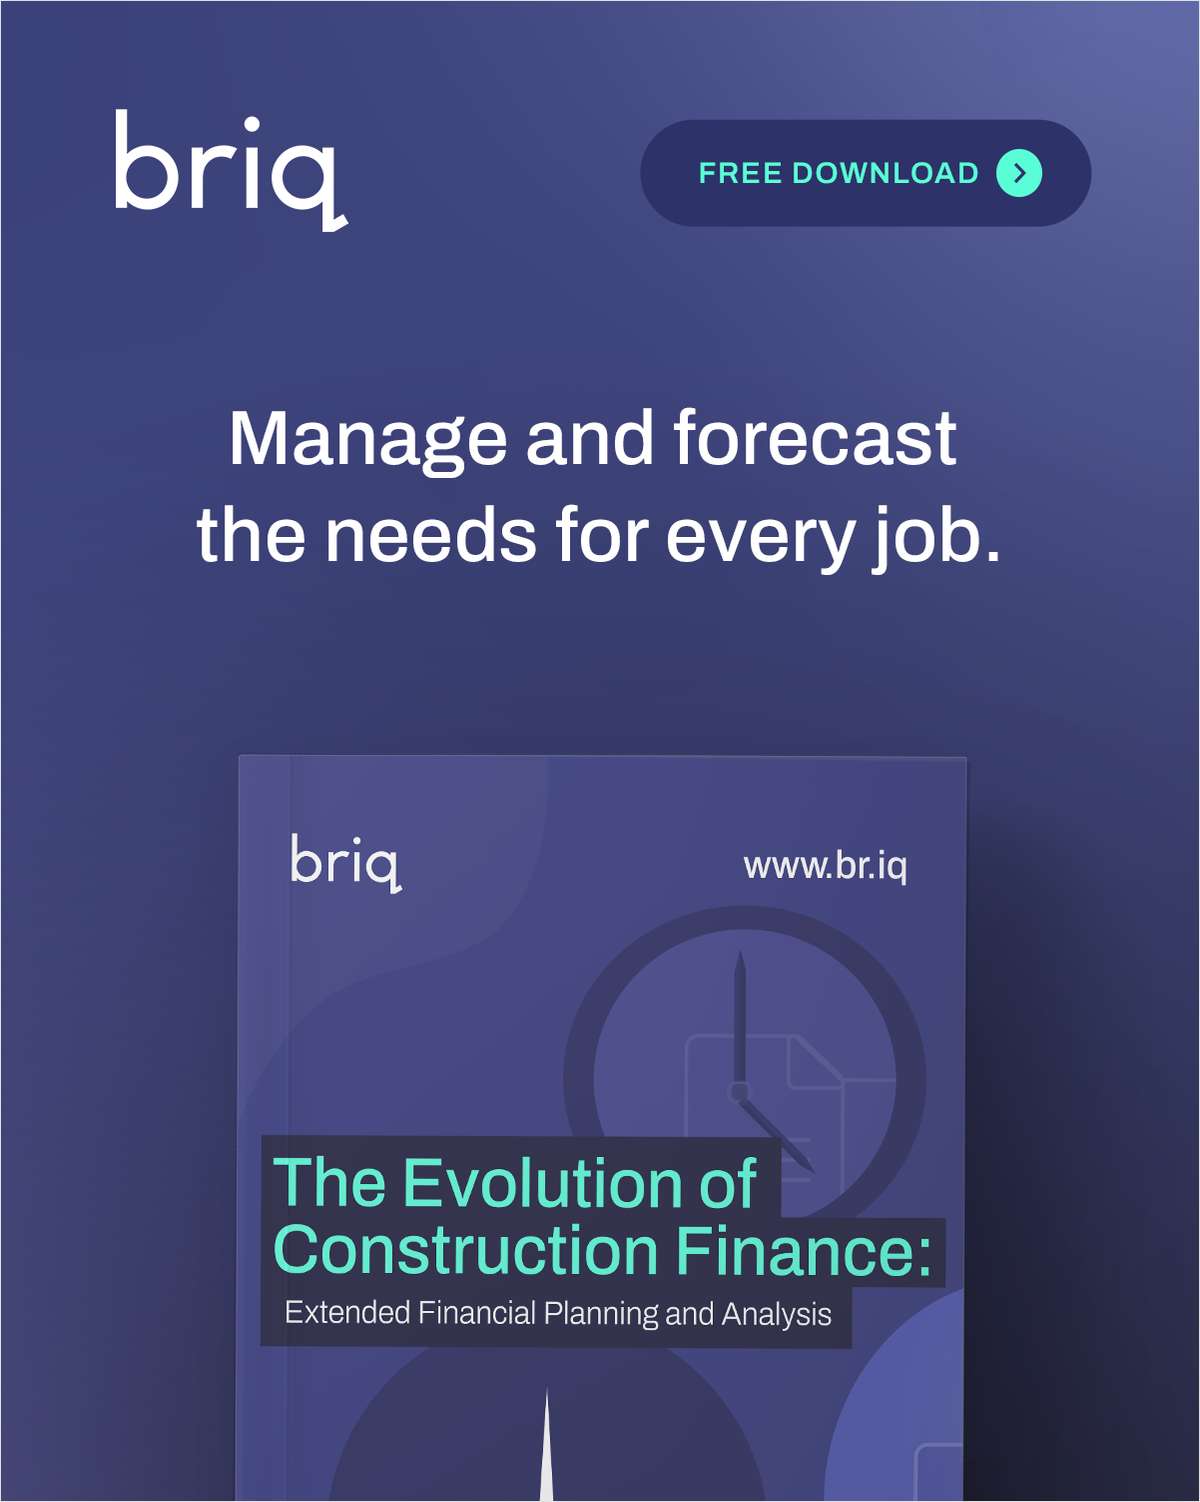 The Evolution of Construction Finance: Extended Financial Planning and Analysis